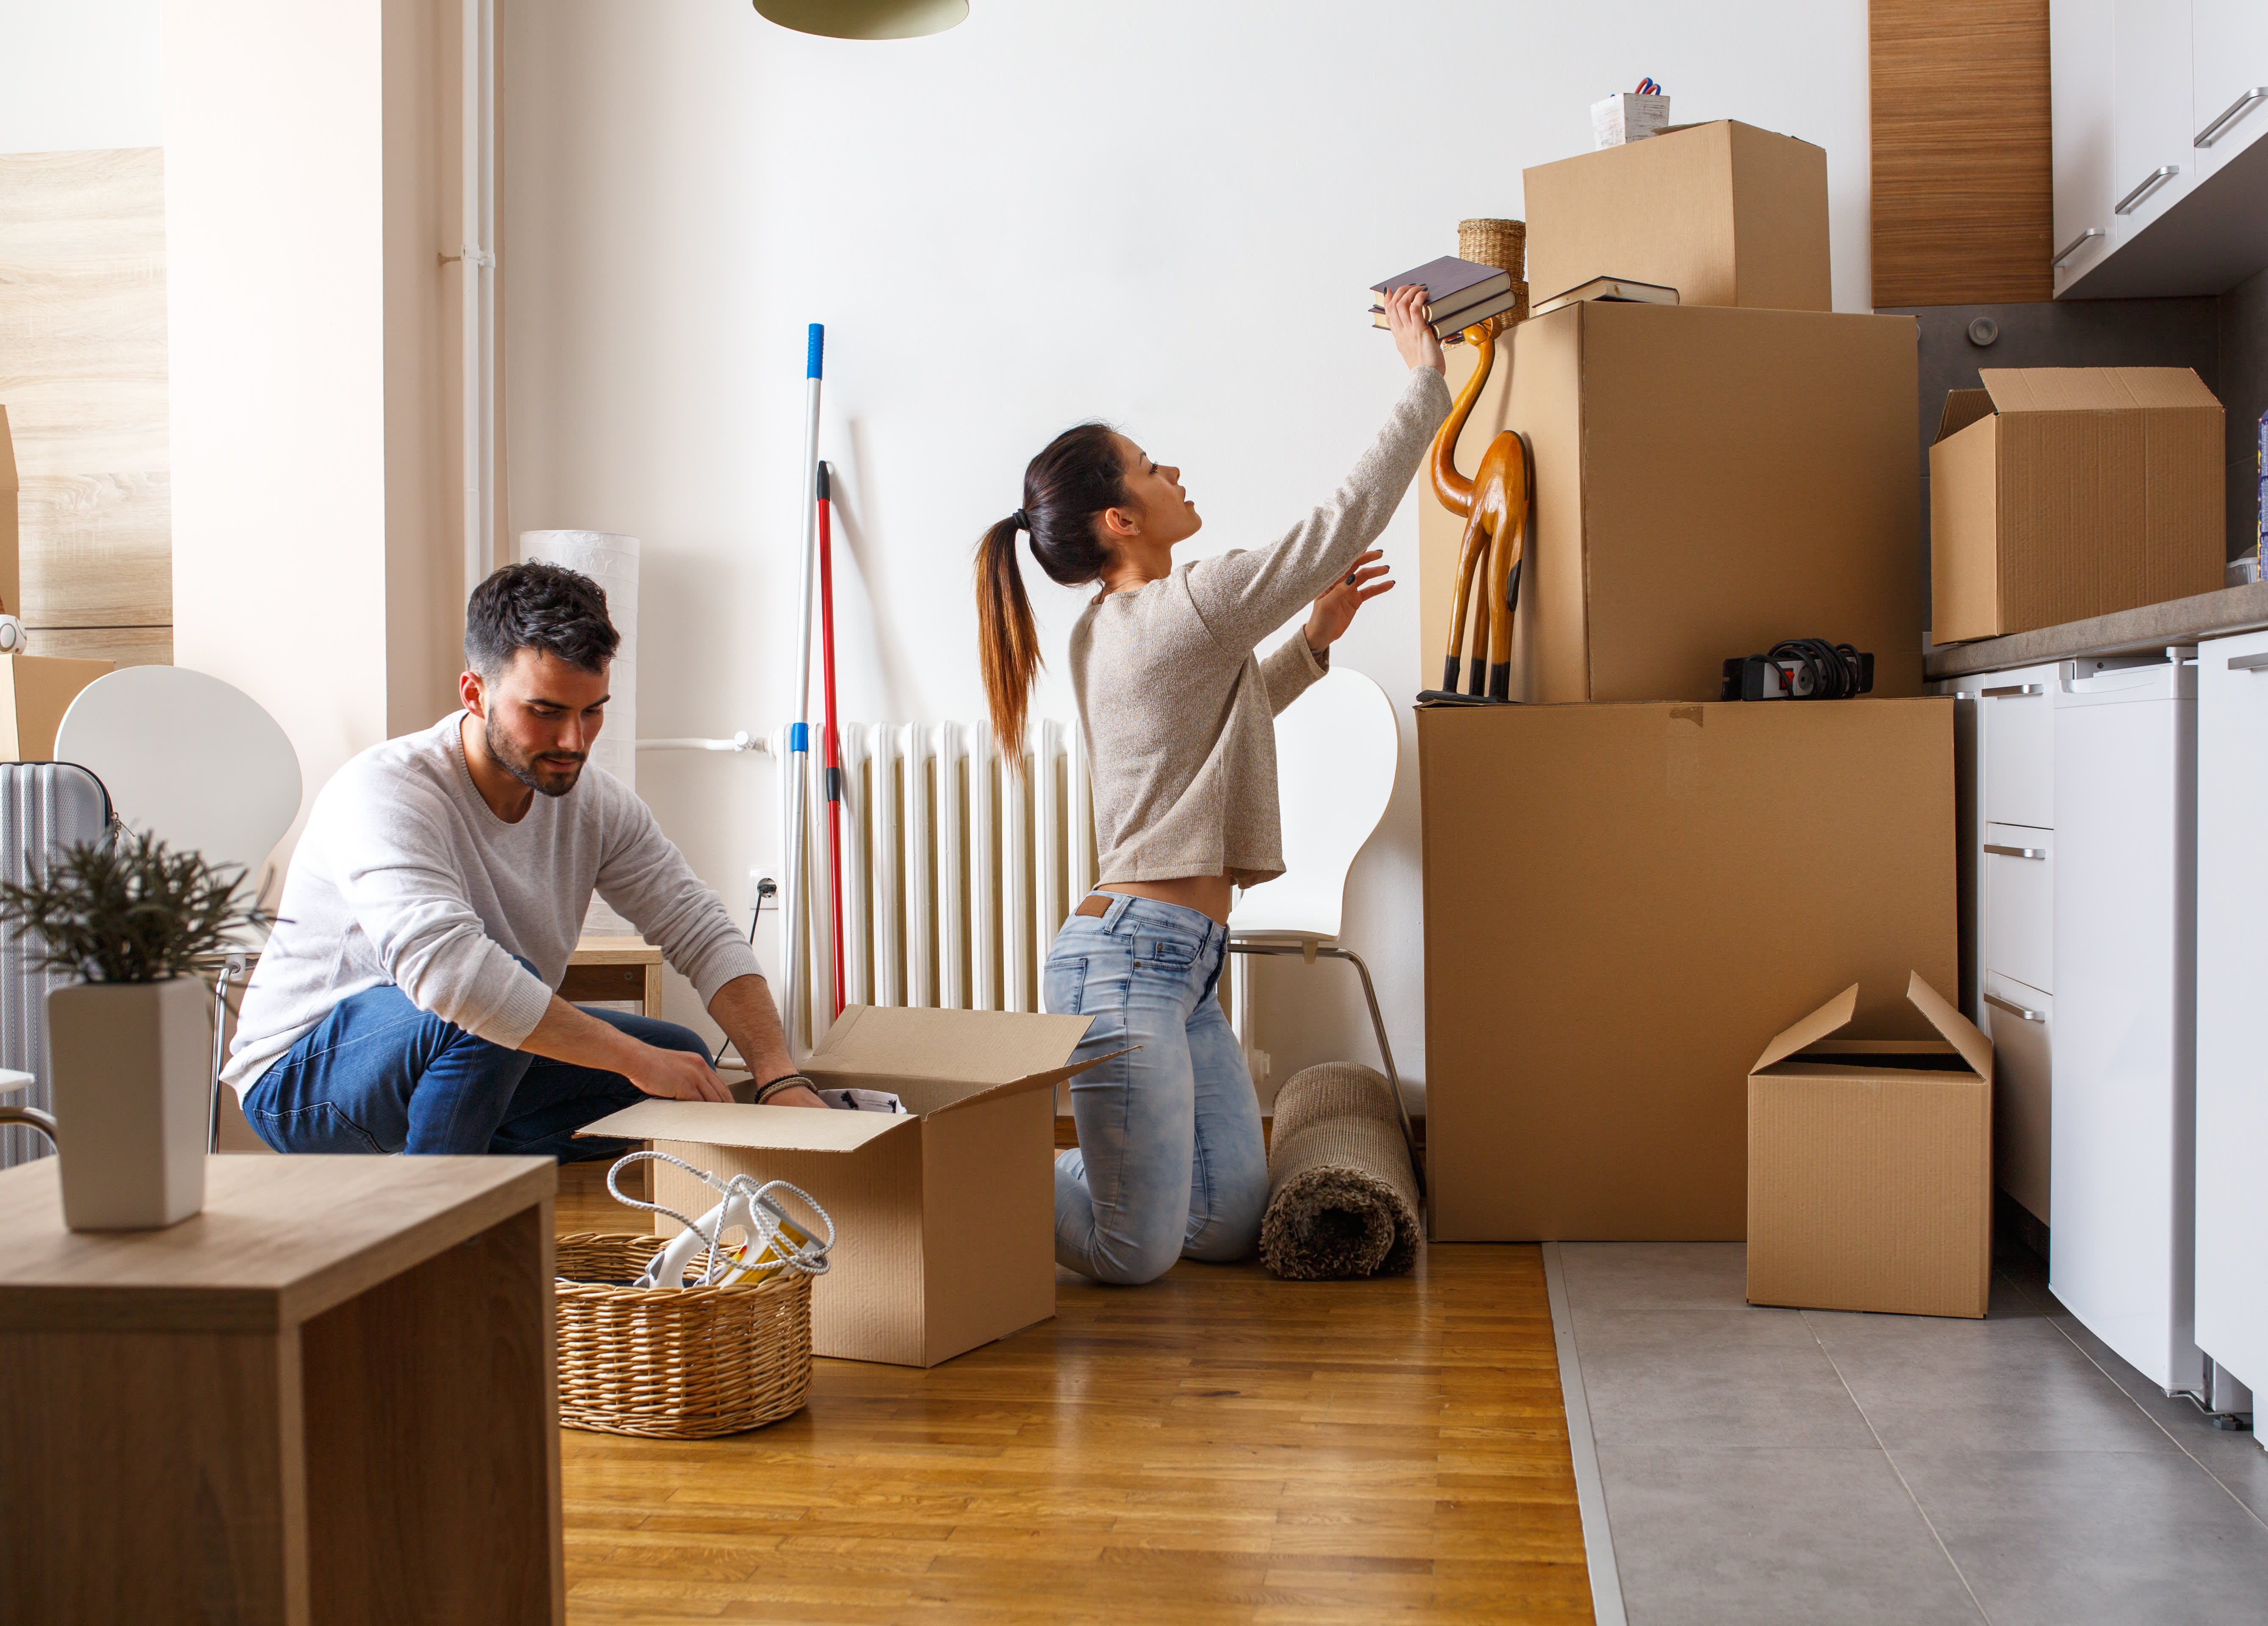 Moving Essentials  What You REALLY Need Moving From One Home to